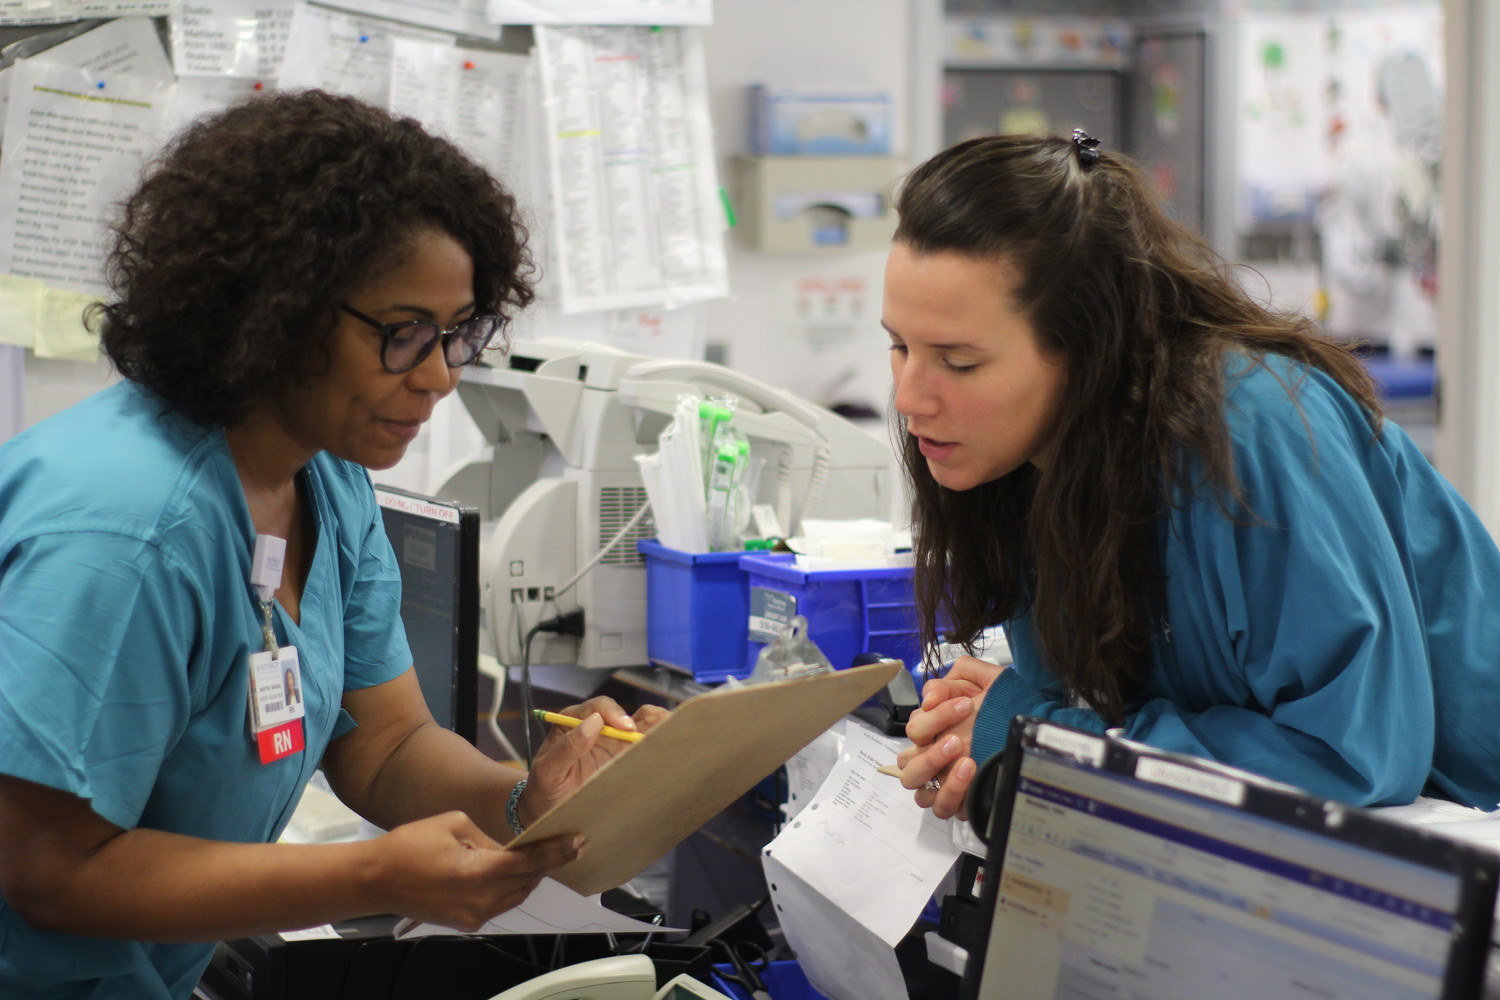 Martine Marsan, a nurse assistant manager at NYU Winthrop Hospital, left, consulted with one of her fellow nurses in the Ambulatory Surgical Unit/Post-Anesthesia Care Unit.